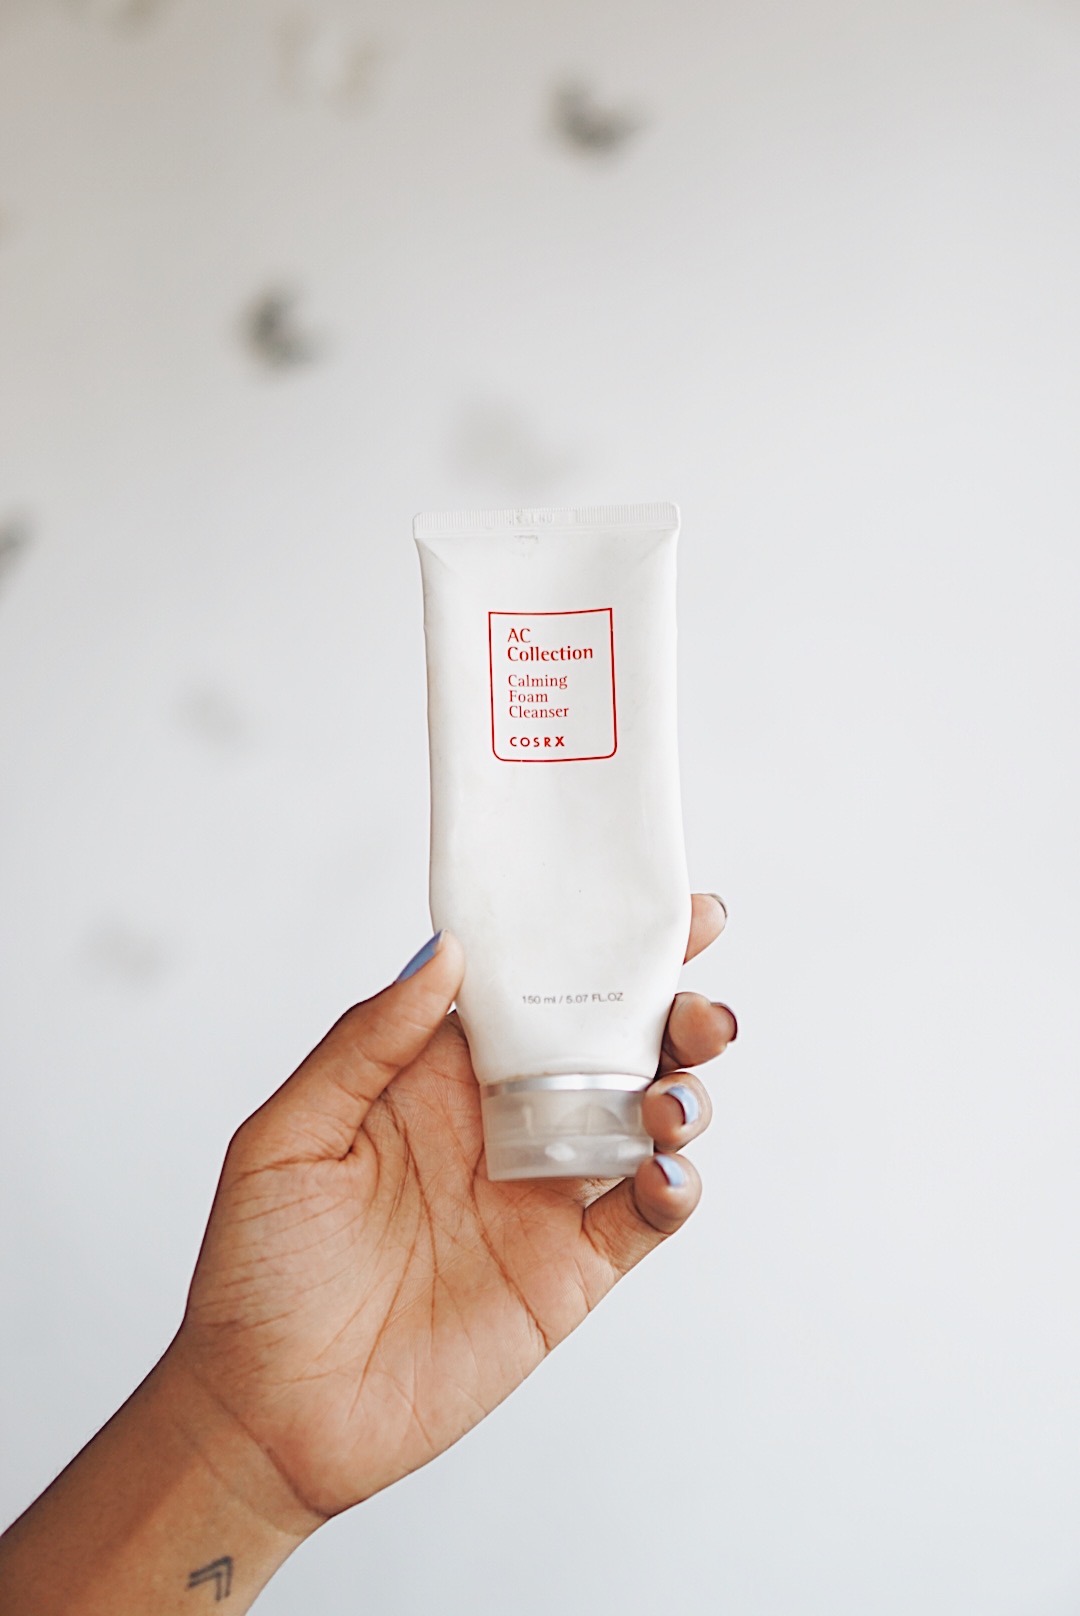 Tube of the cosrx calming foam cleanser